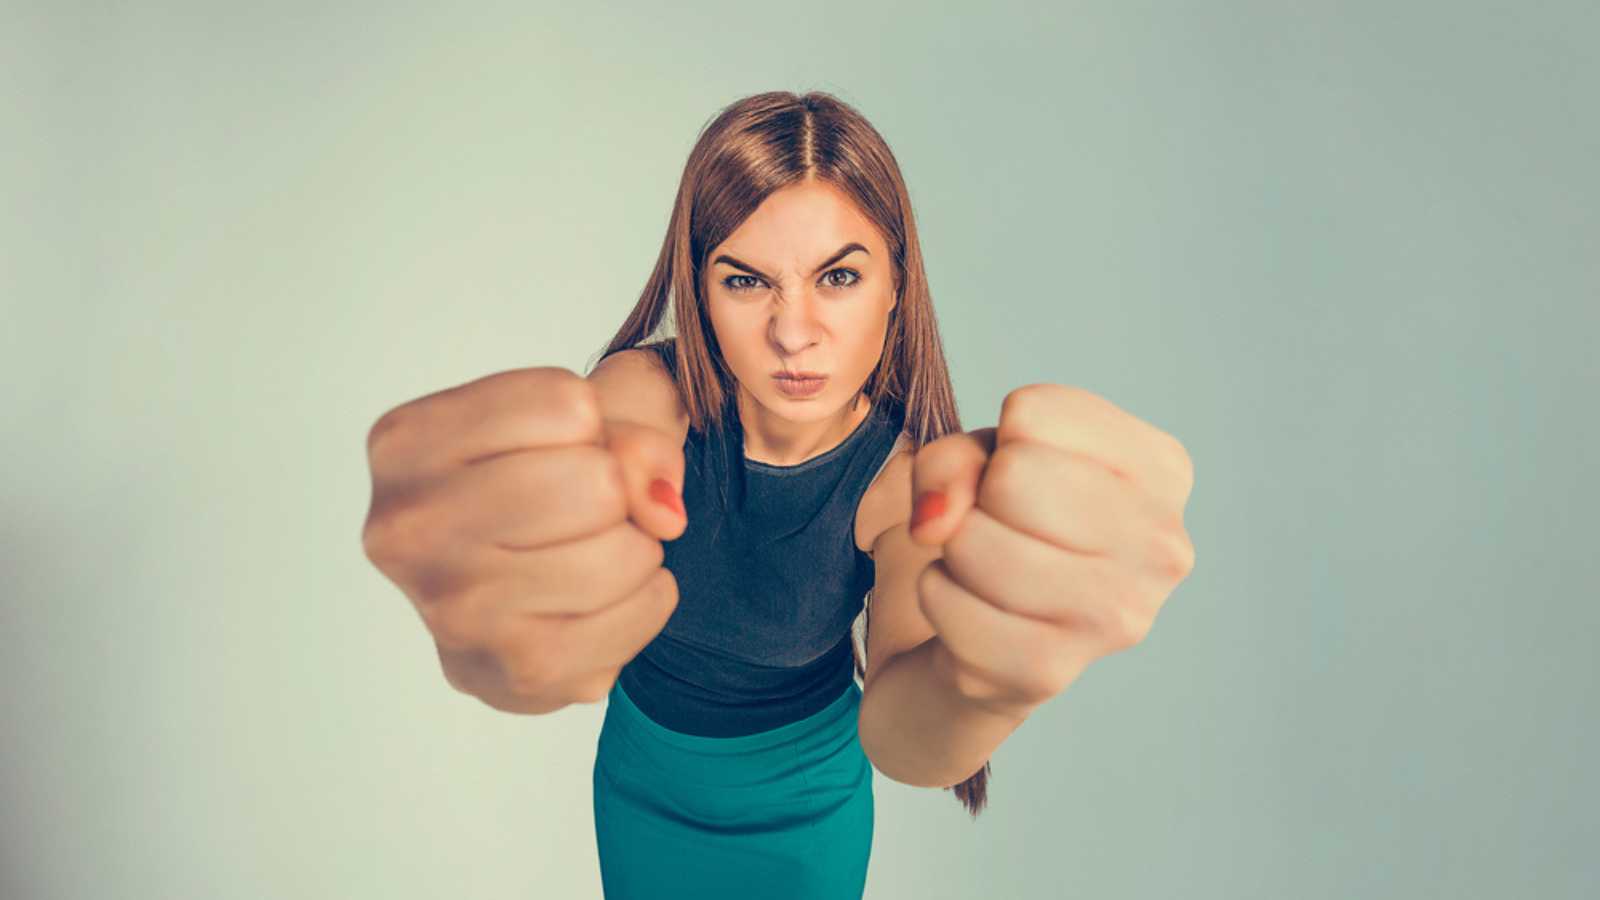 angry young woman showing fists about to punch hit someone 